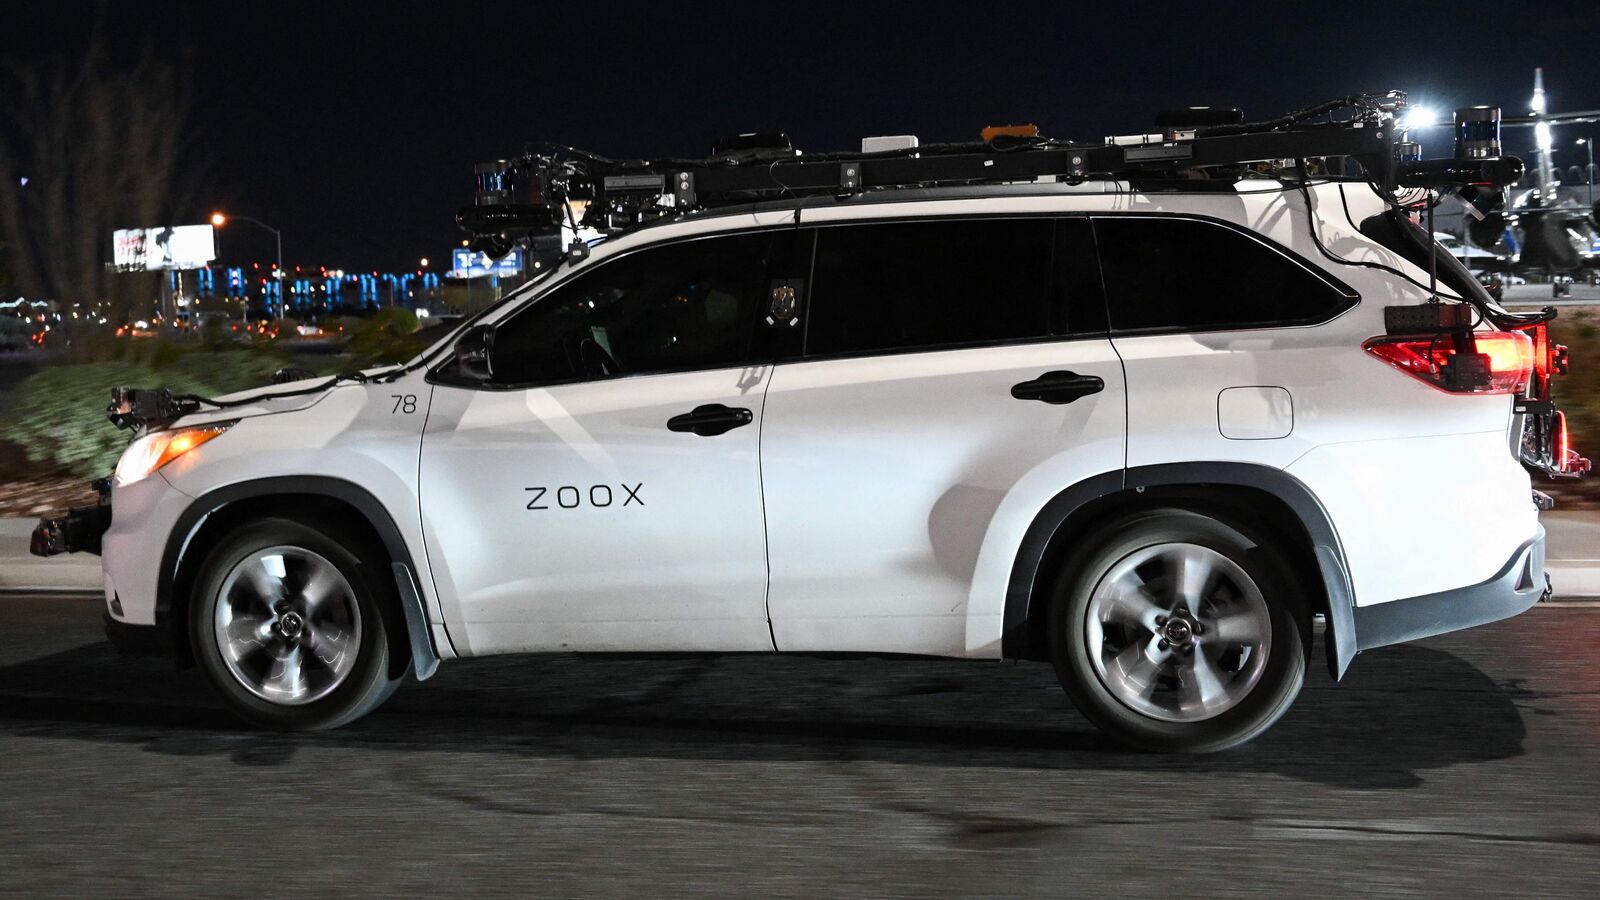 s Self-Driving Car Unit Zoox Carries Passengers on Public Roads -  Bloomberg